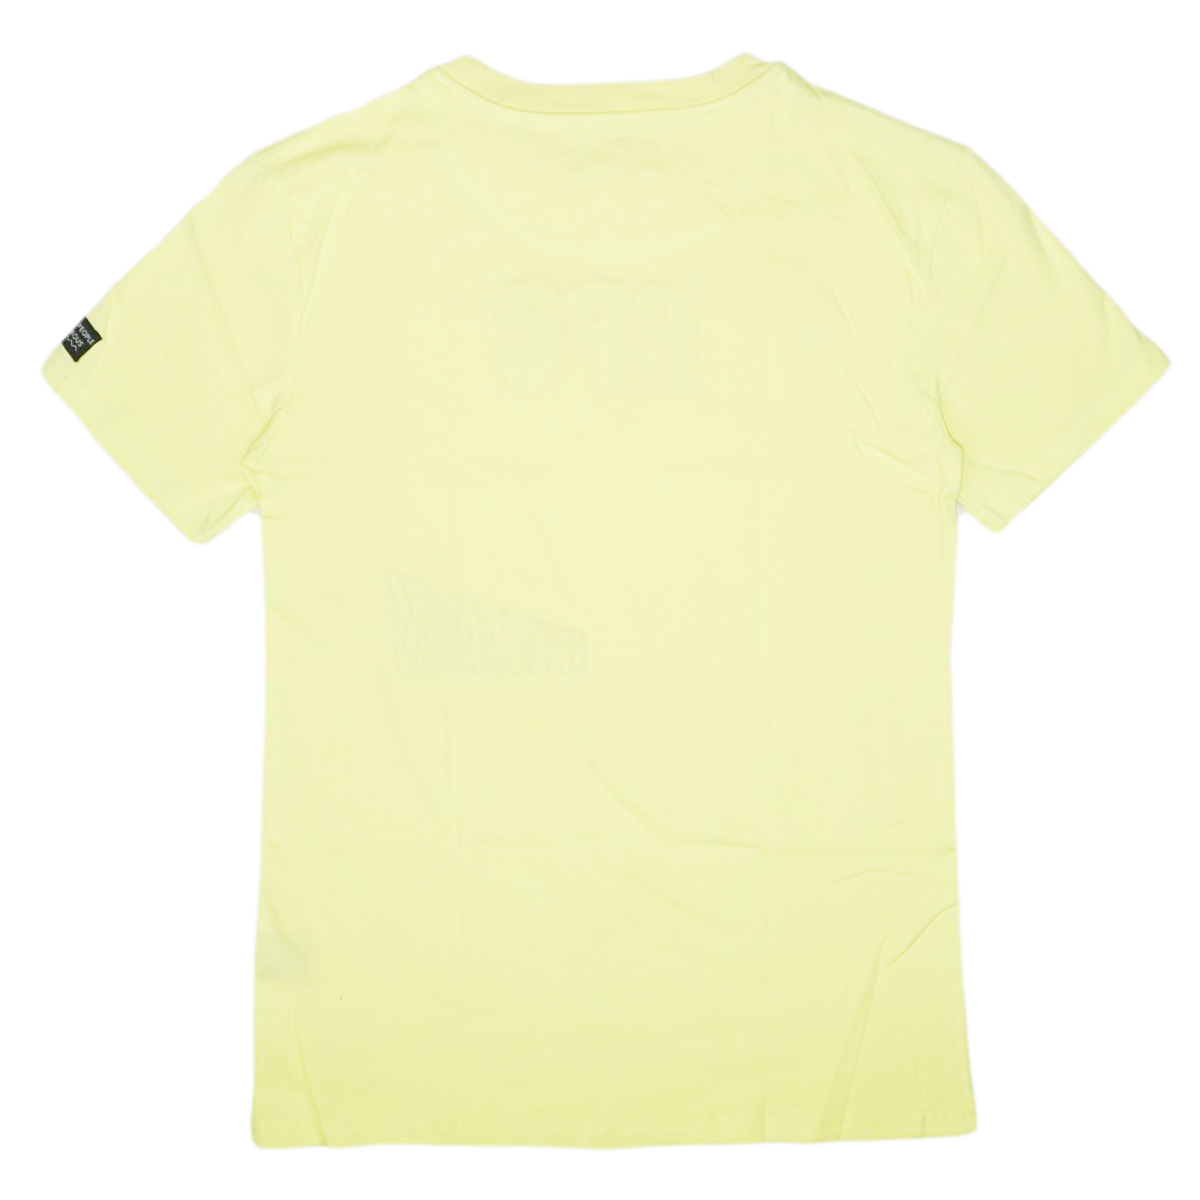 RPC Wave Tee (Neon Green) /MD2